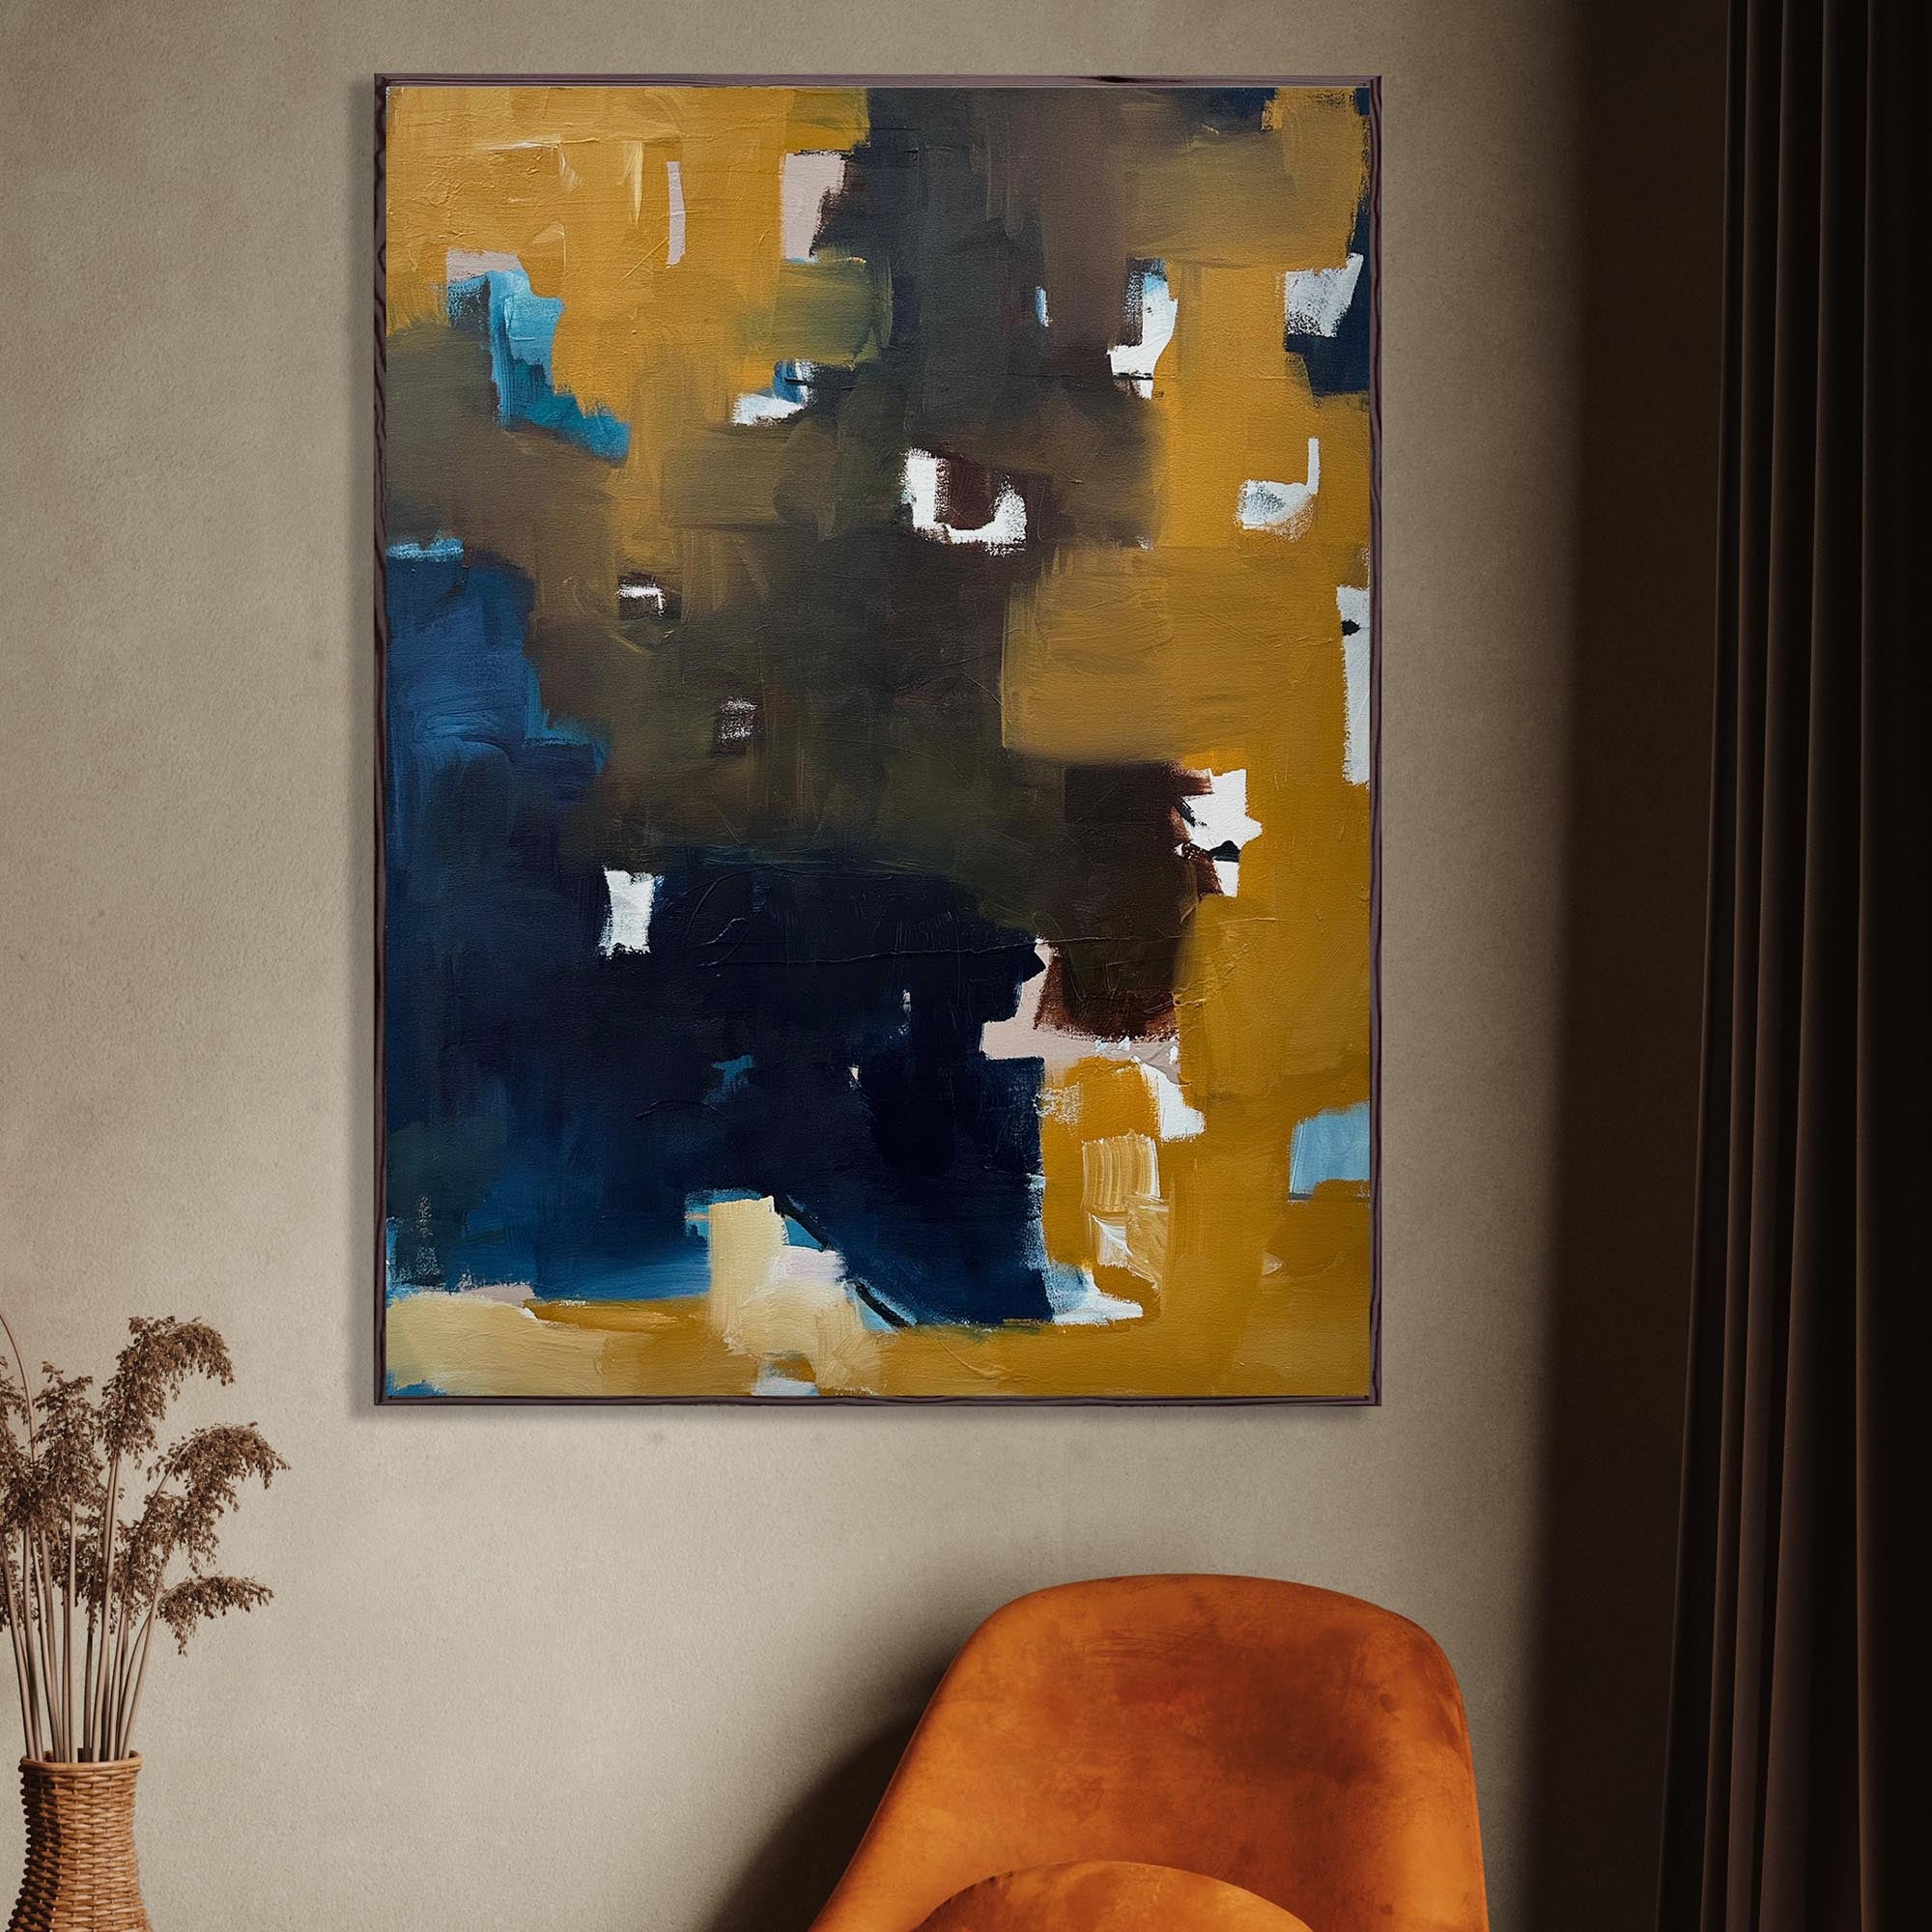 Beyond A Dream 2 - Original Painting-Abstract House